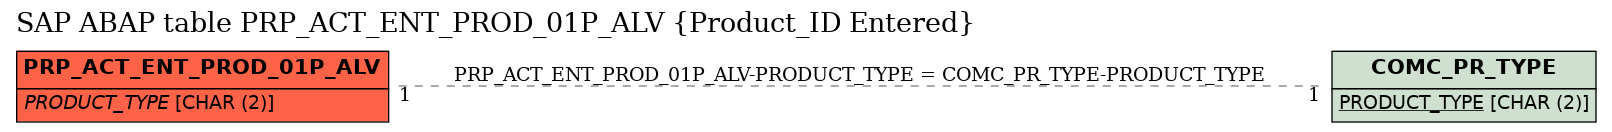 E-R Diagram for table PRP_ACT_ENT_PROD_01P_ALV (Product_ID Entered)